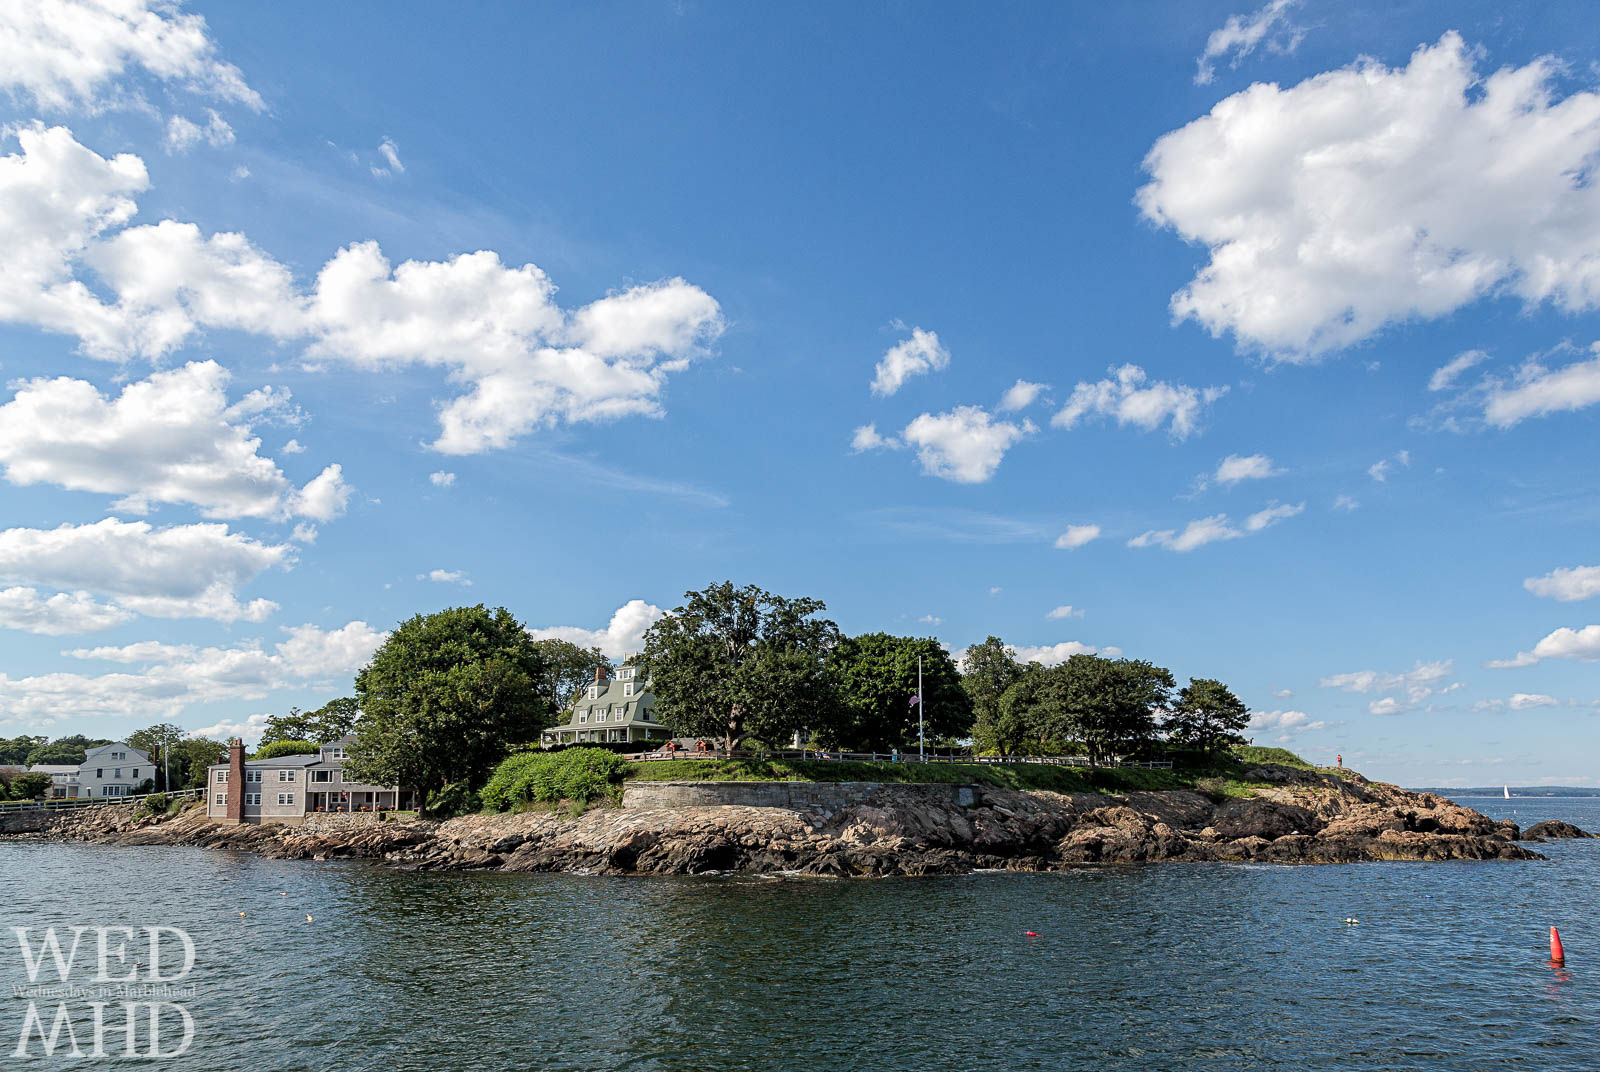 Fort Sewall - Wednesdays in Marblehead